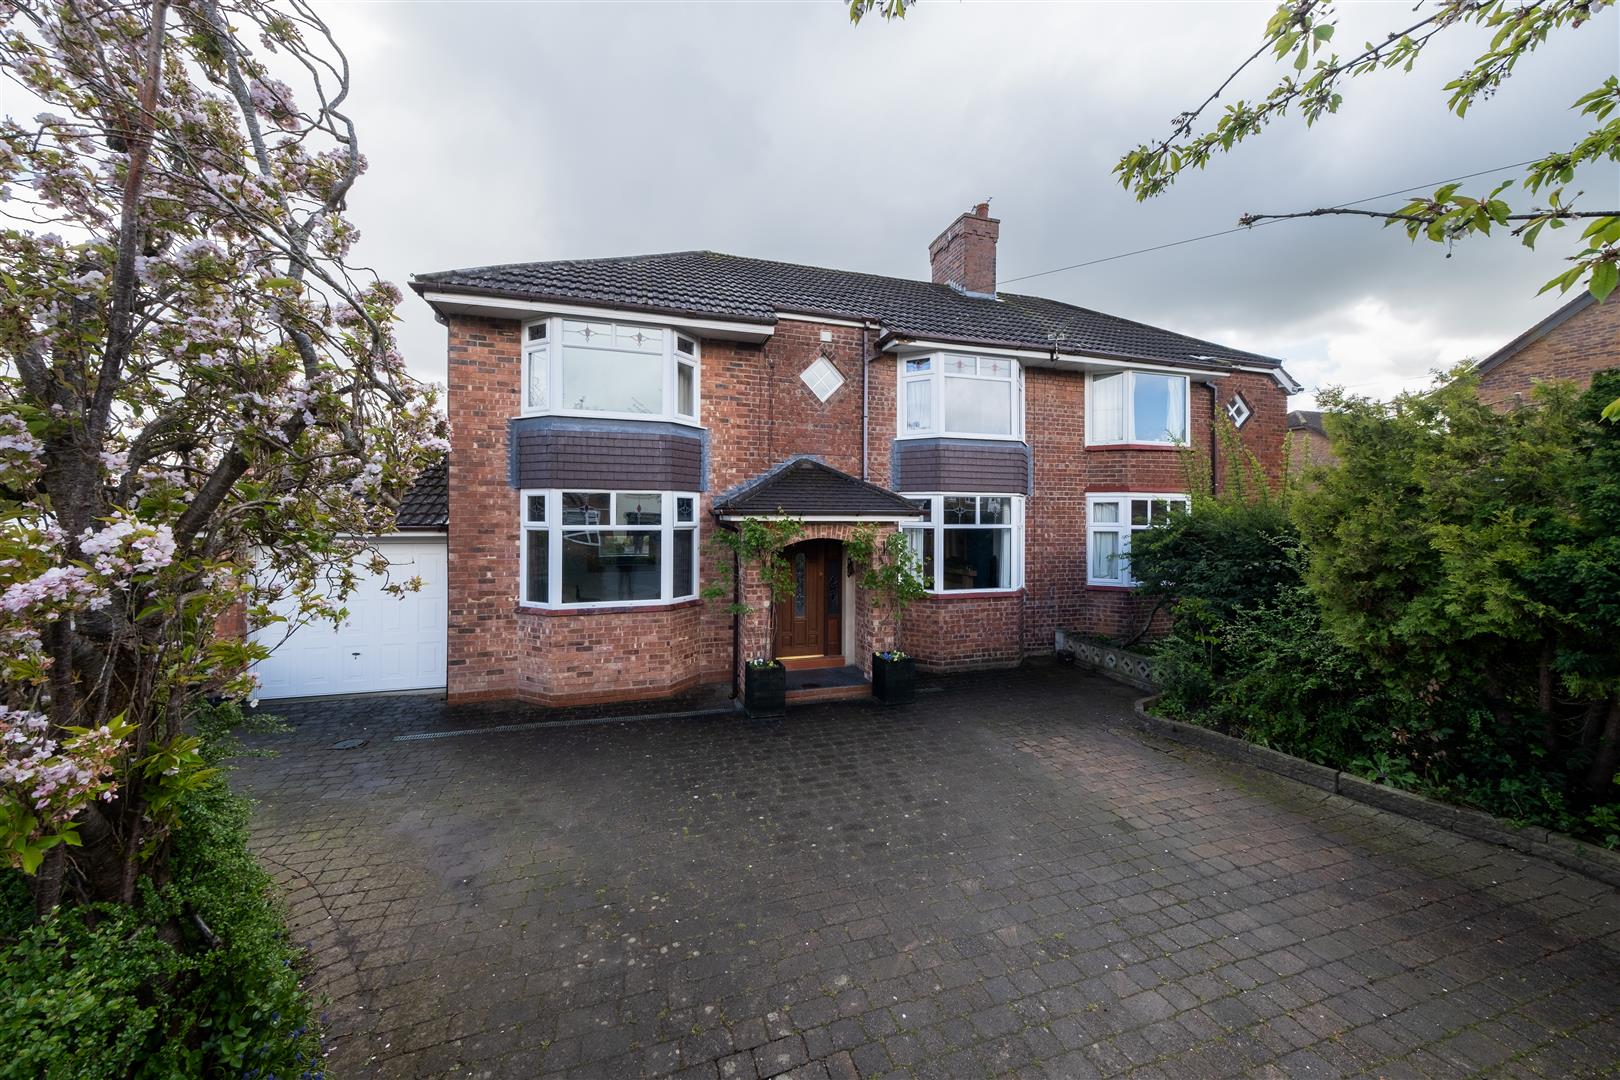 5 bedroom  Semi Detached House for Sale in Northwich